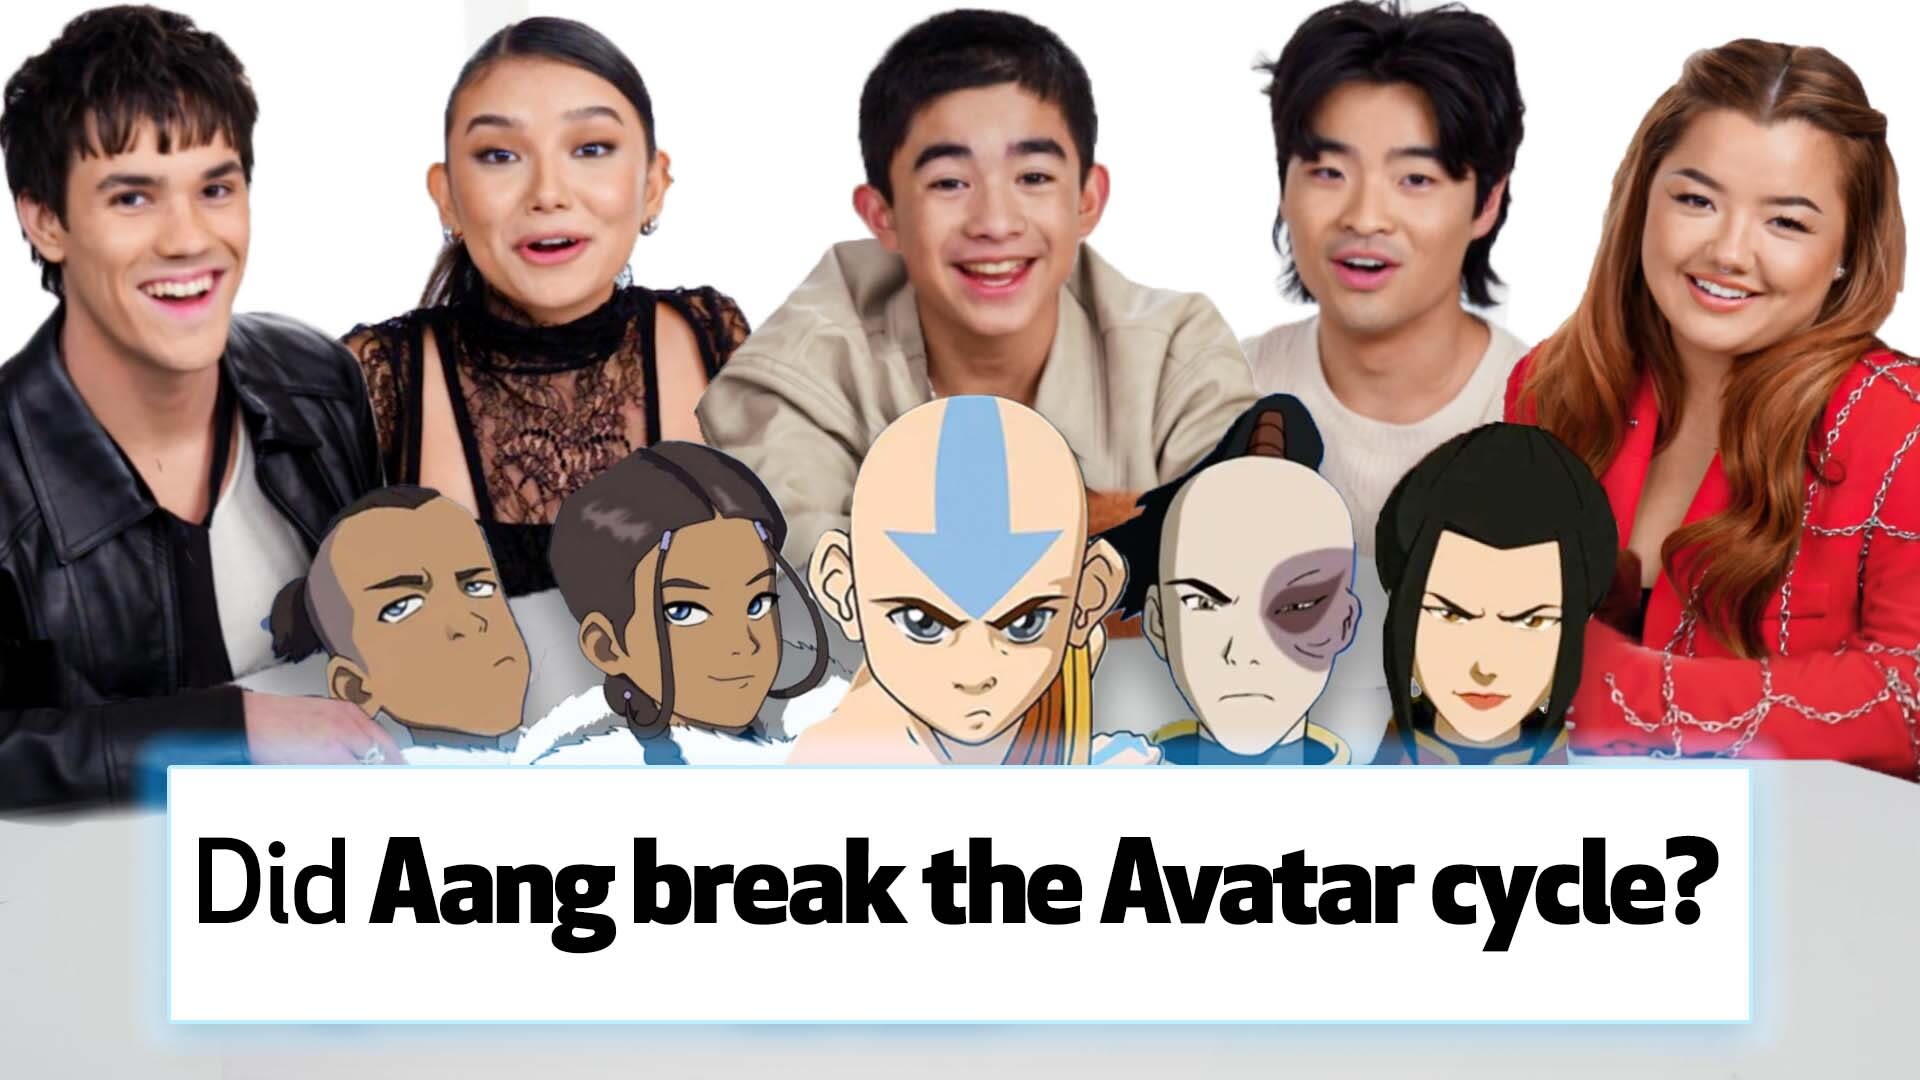 Watch 'Avatar: The Last Airbender' Cast Answer Avatar's Most